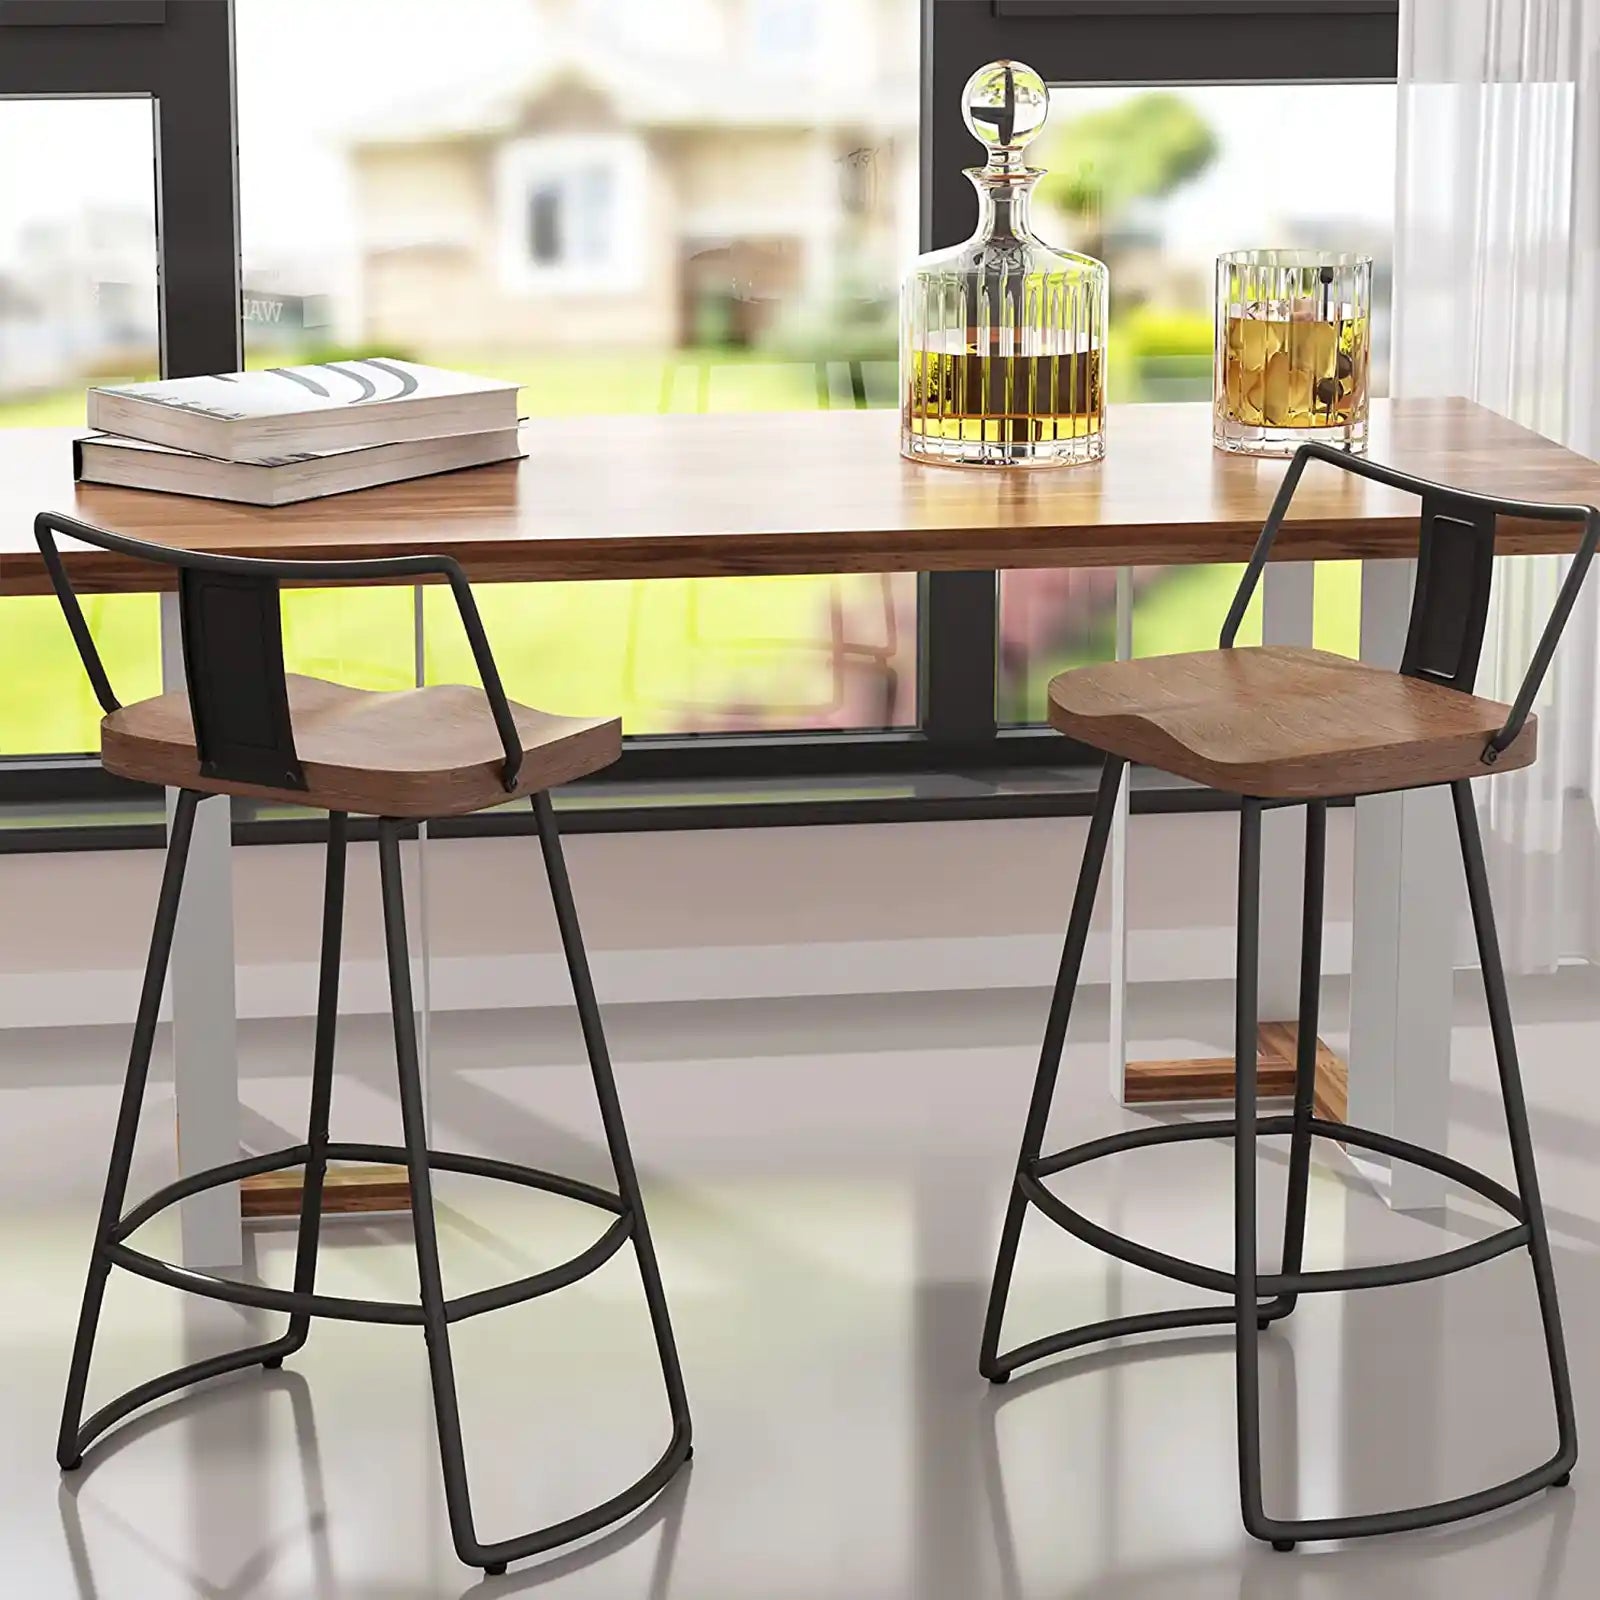 Bar Stools Set of 2 Swivel Counter Height Stools, 24 Inch, 26 Inch, 30 Inch